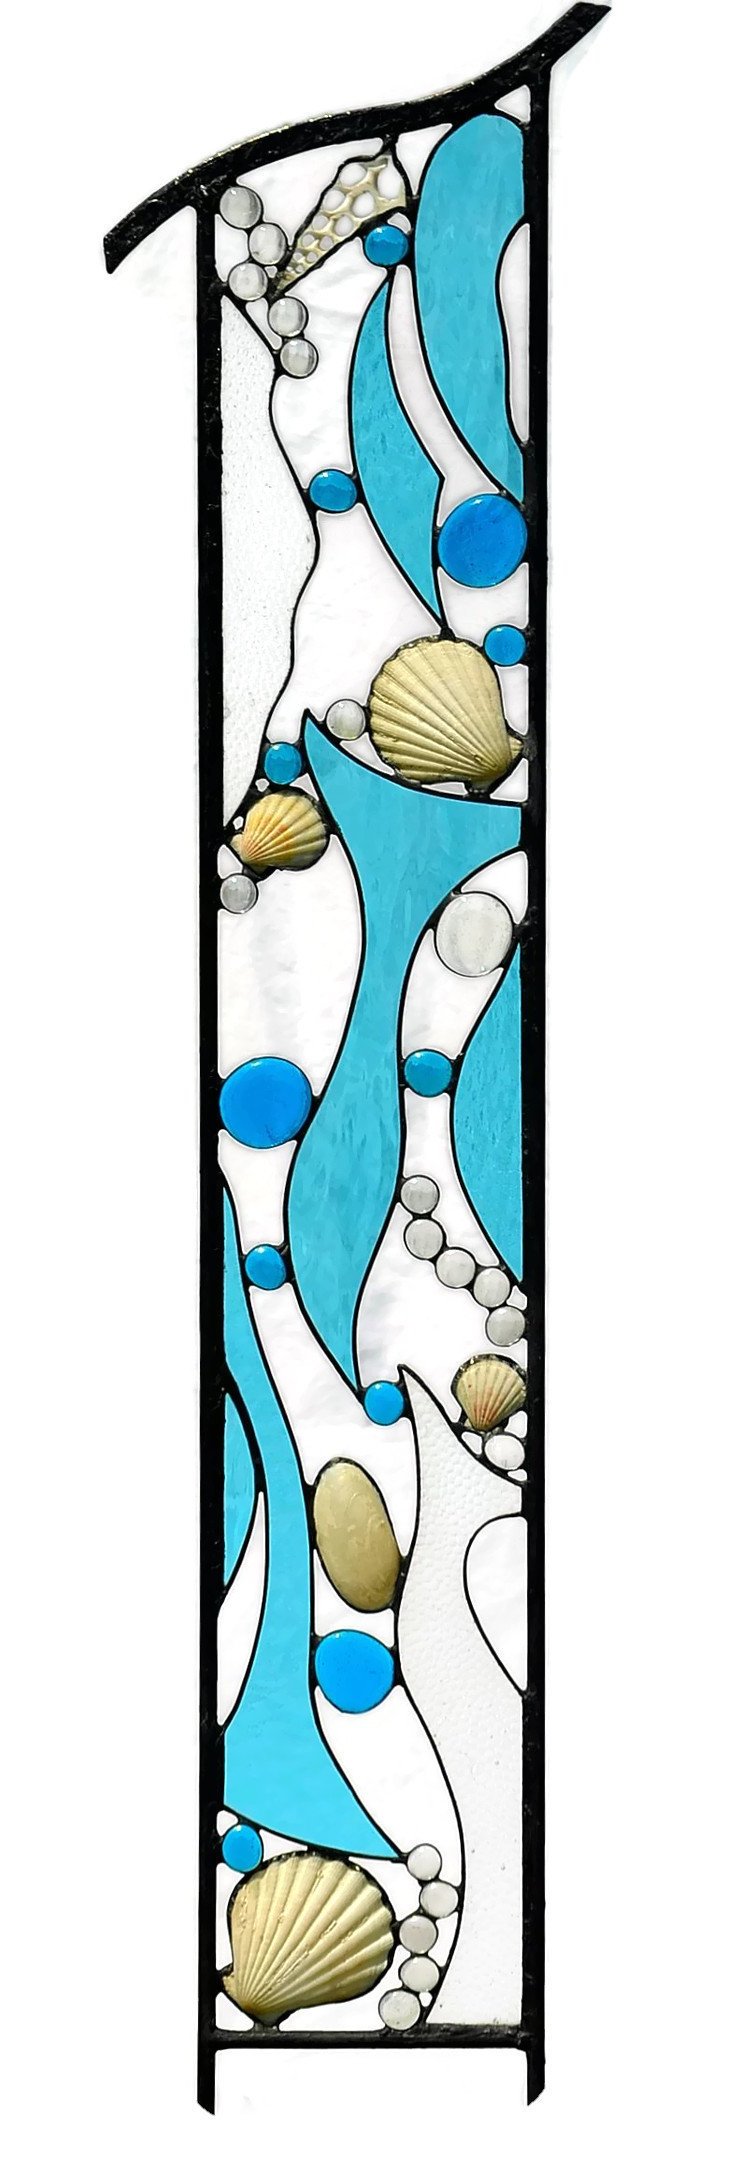 Ocean Themed Stained Glass Art for Beach House Decorating. &quot;Ocean Treasures&quot;